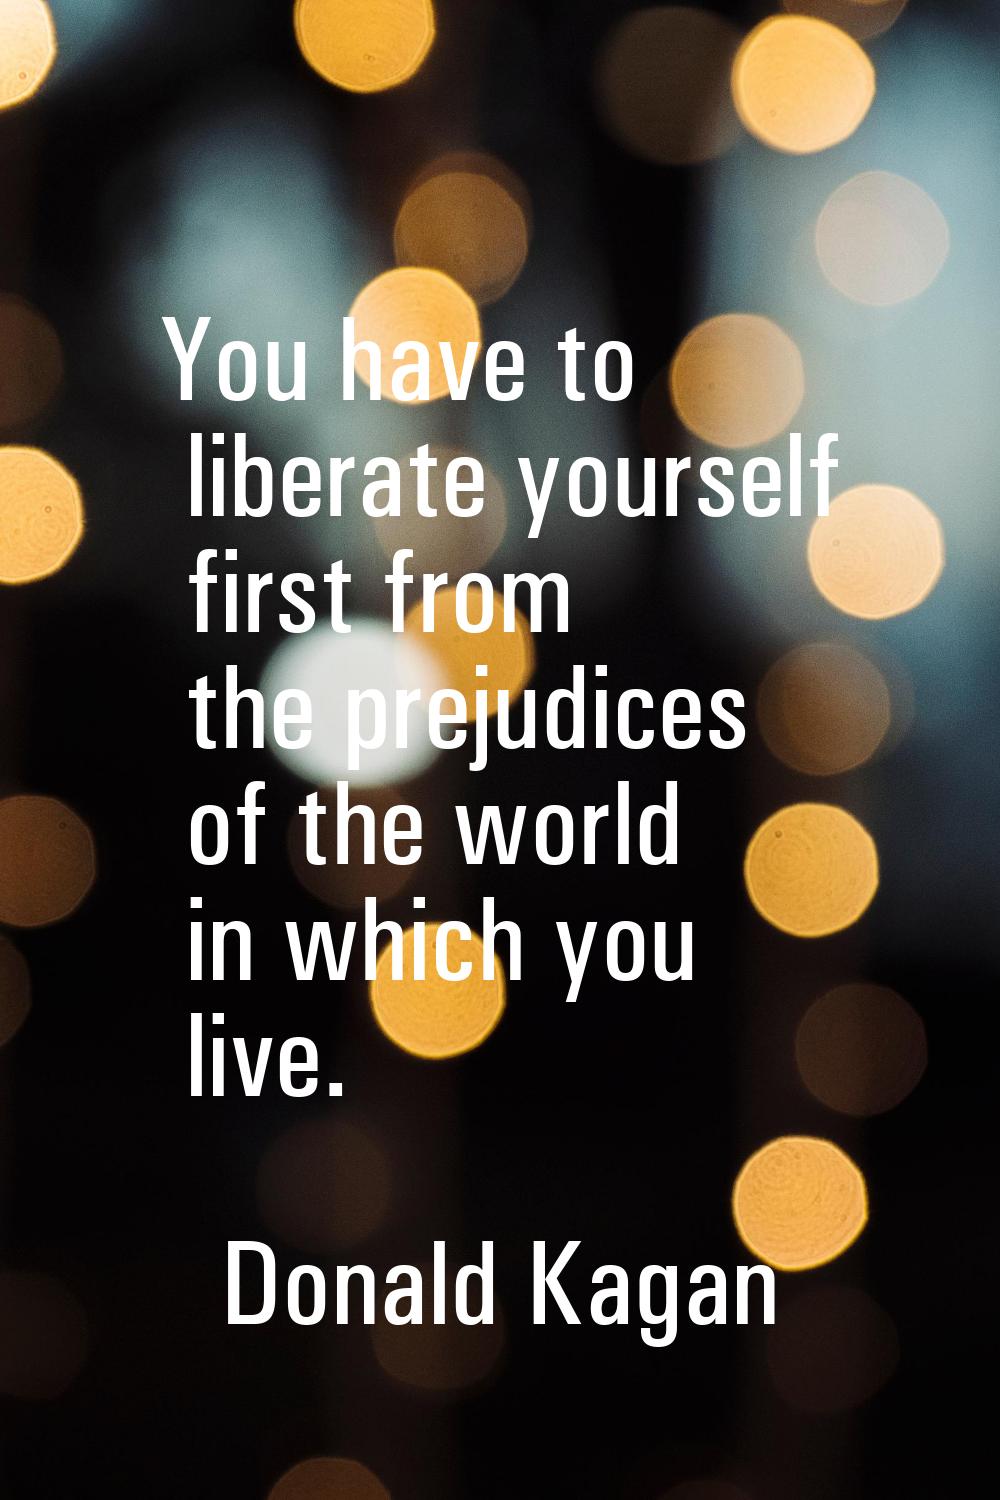 You have to liberate yourself first from the prejudices of the world in which you live.